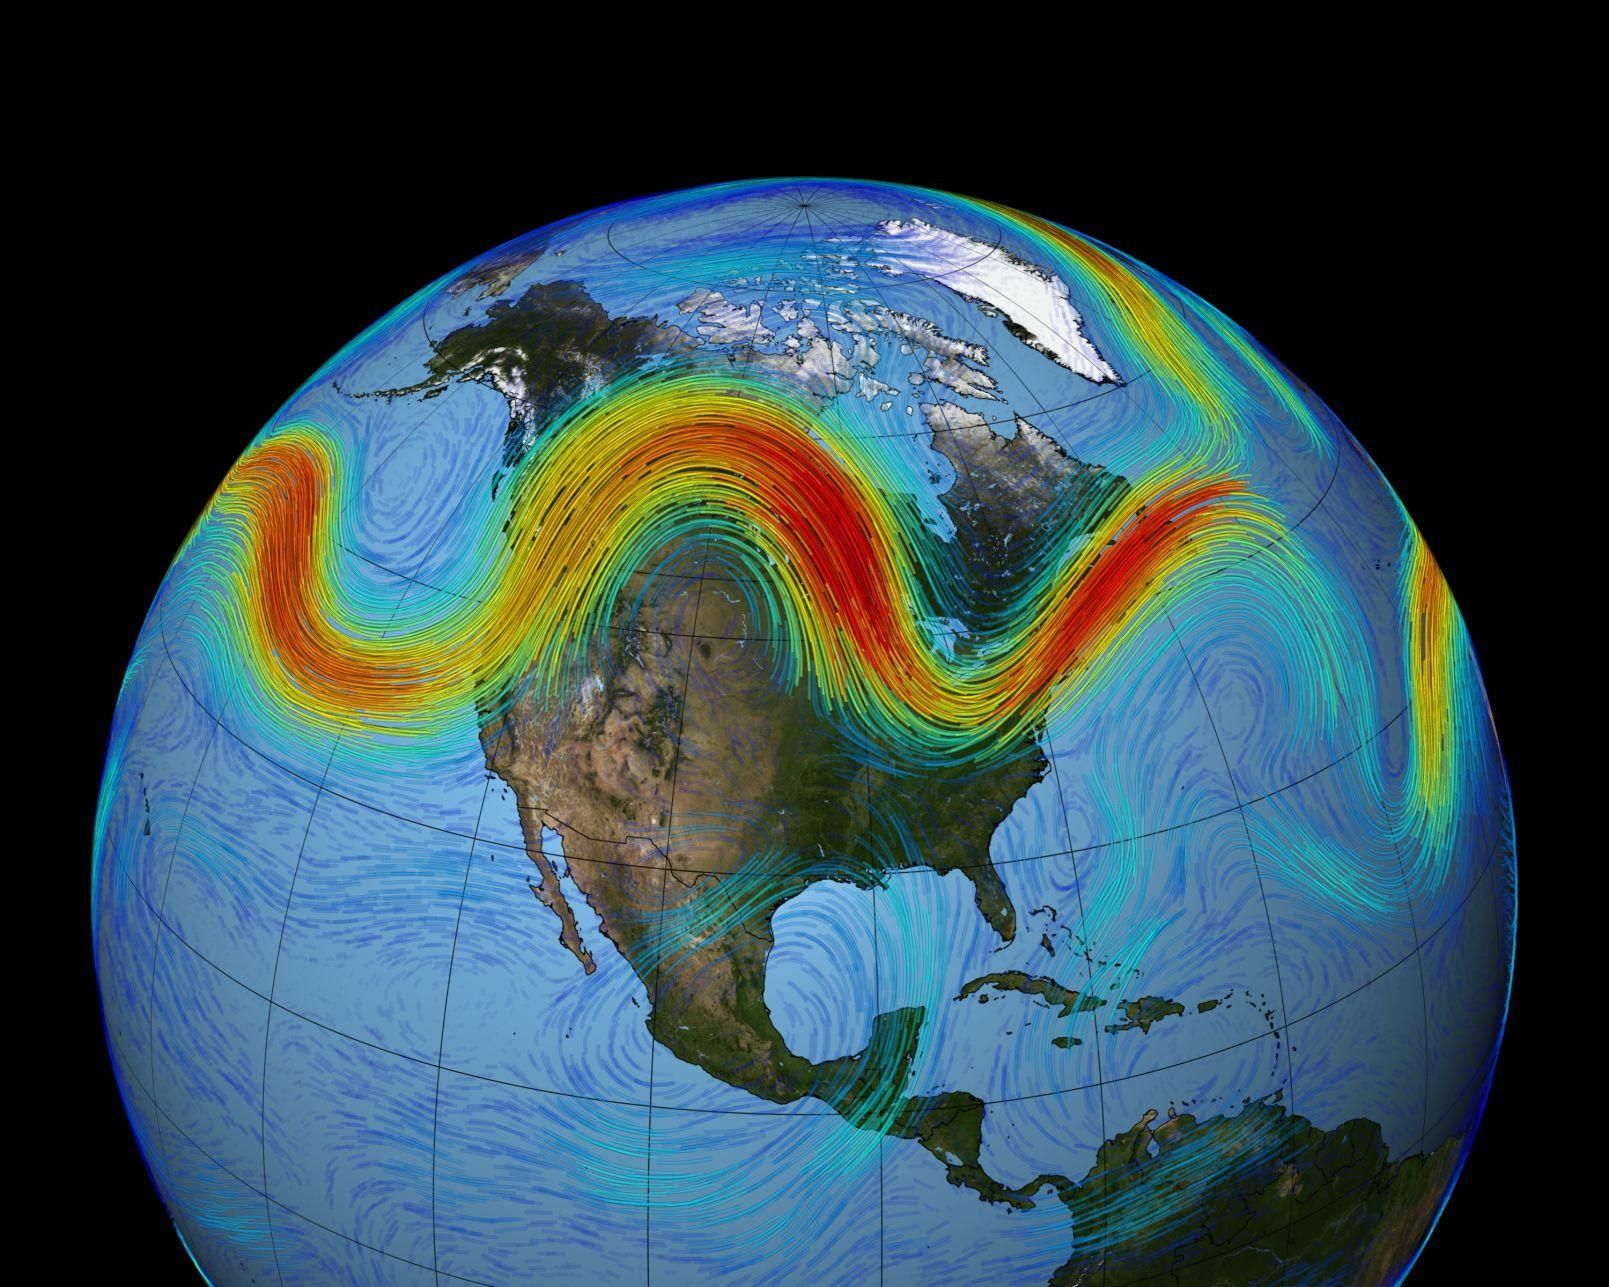 Meandering around the planet like a roller coaster in the sky, the jet stream is a fast-moving belt of westerly winds. It’s created by the convergence of cold air masses descending from the Arctic and rising warm air from the tropics, its momentum accelerating because of the Earth’s rotation. Graphic courtesy of NASA.
